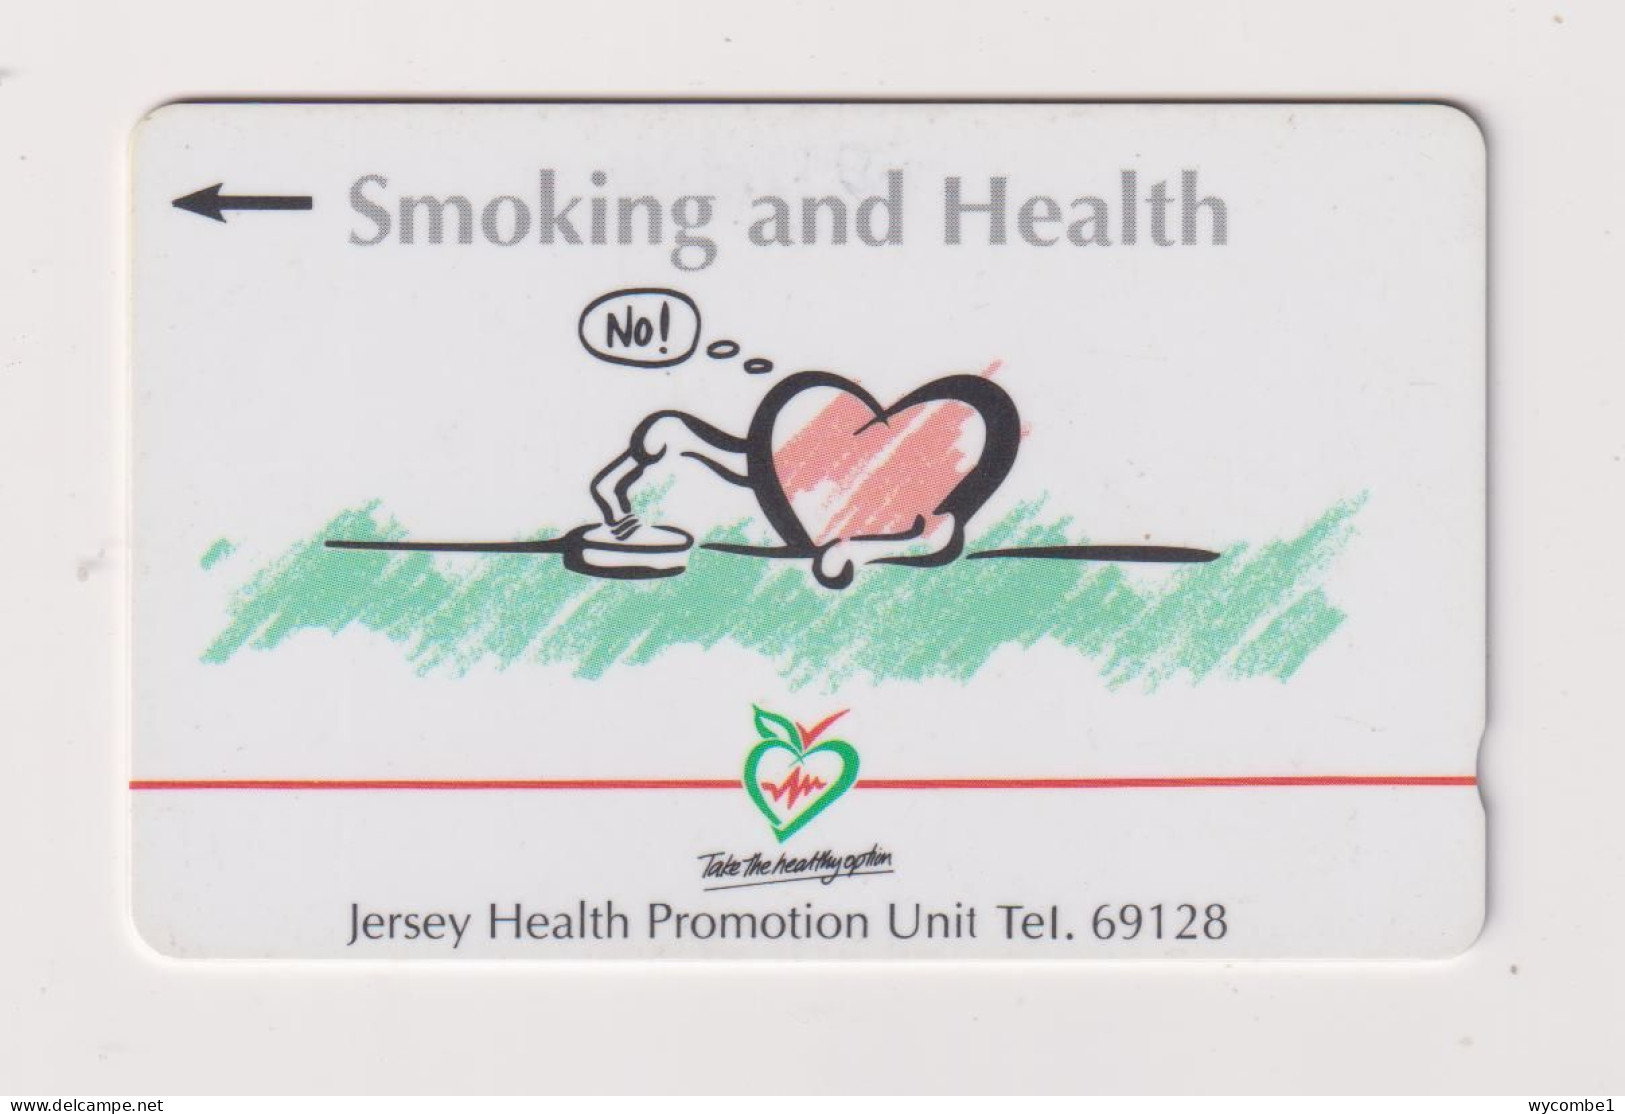 JERSEY -  Smoking And Health GPT Magnetic  Phonecard - Jersey Et Guernesey